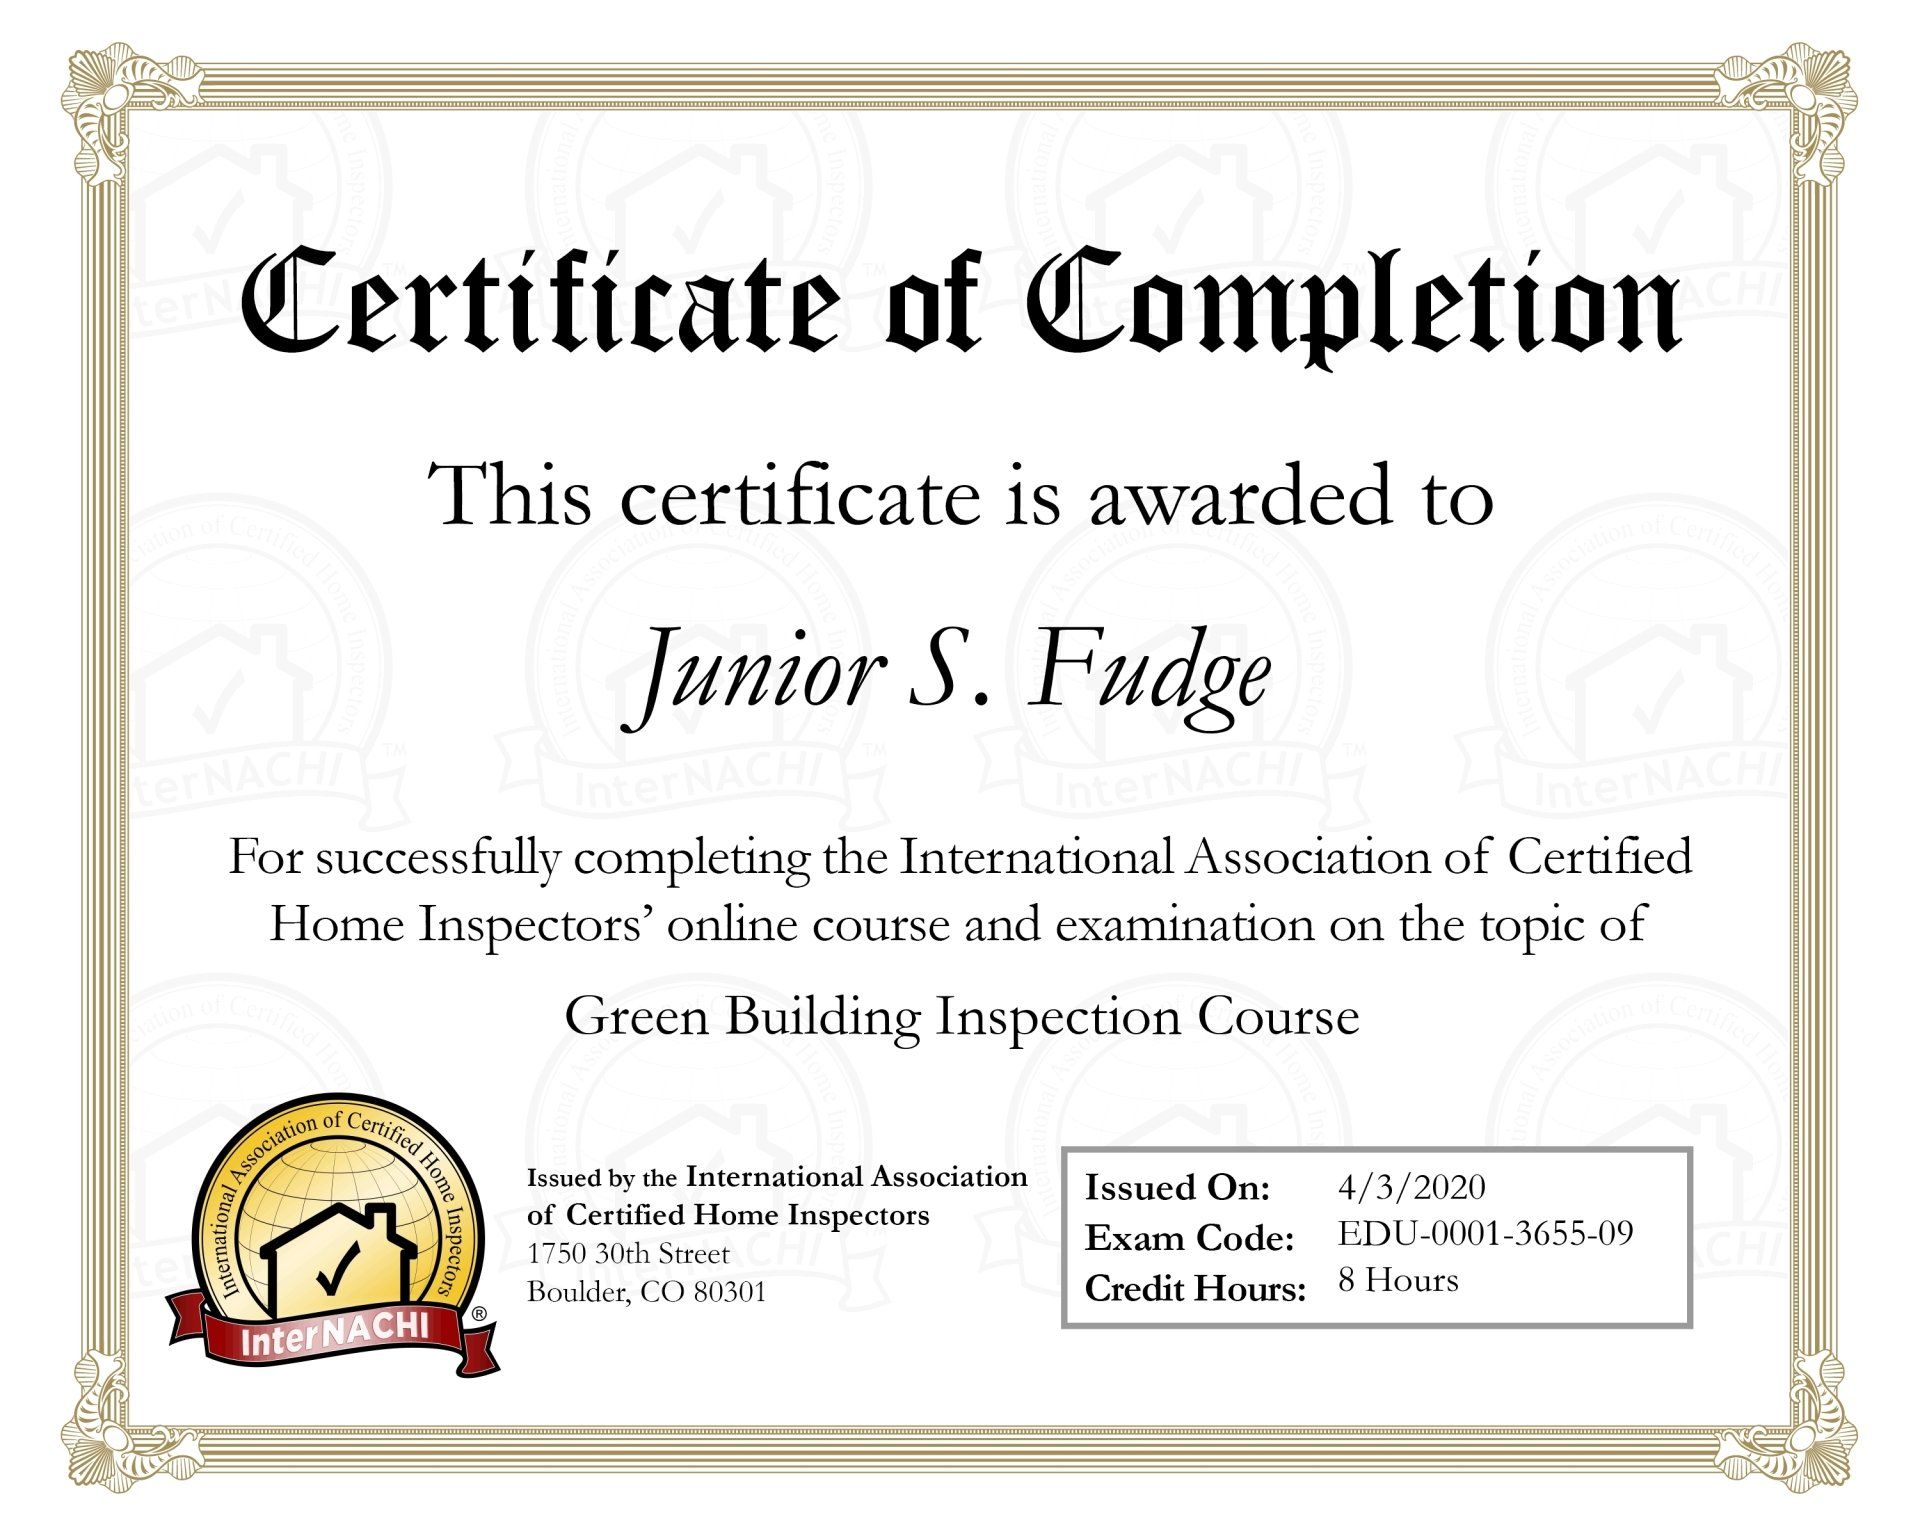 green building inspection - Charlottetown PE home inspectors